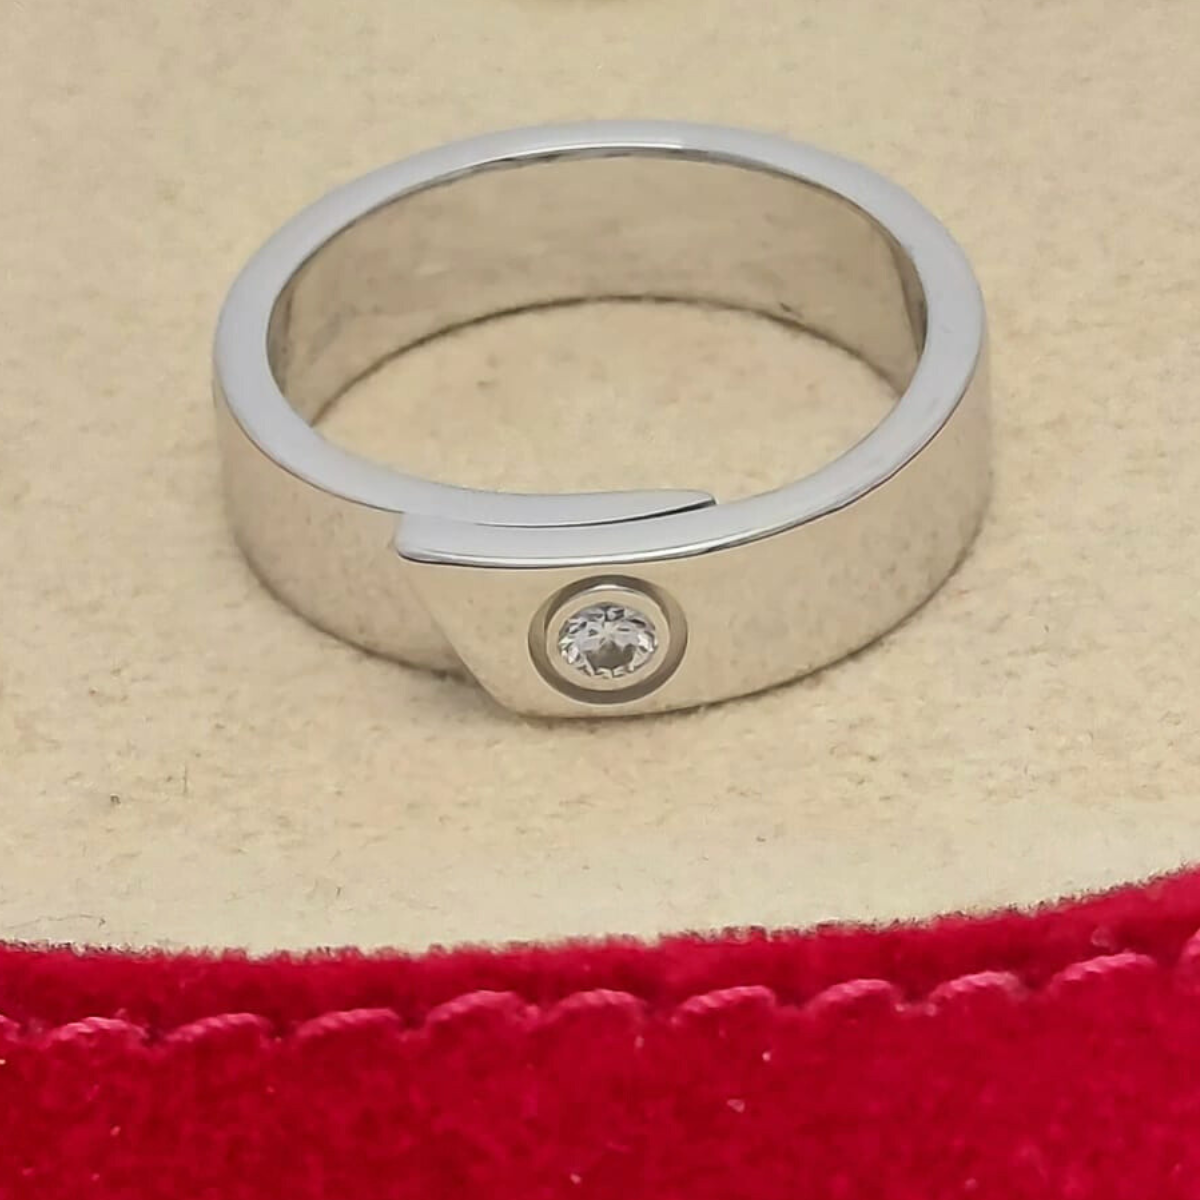 [RELOCATION SALES] 18k Preloved Cartier Anniversary Diamond Ring in White Gold